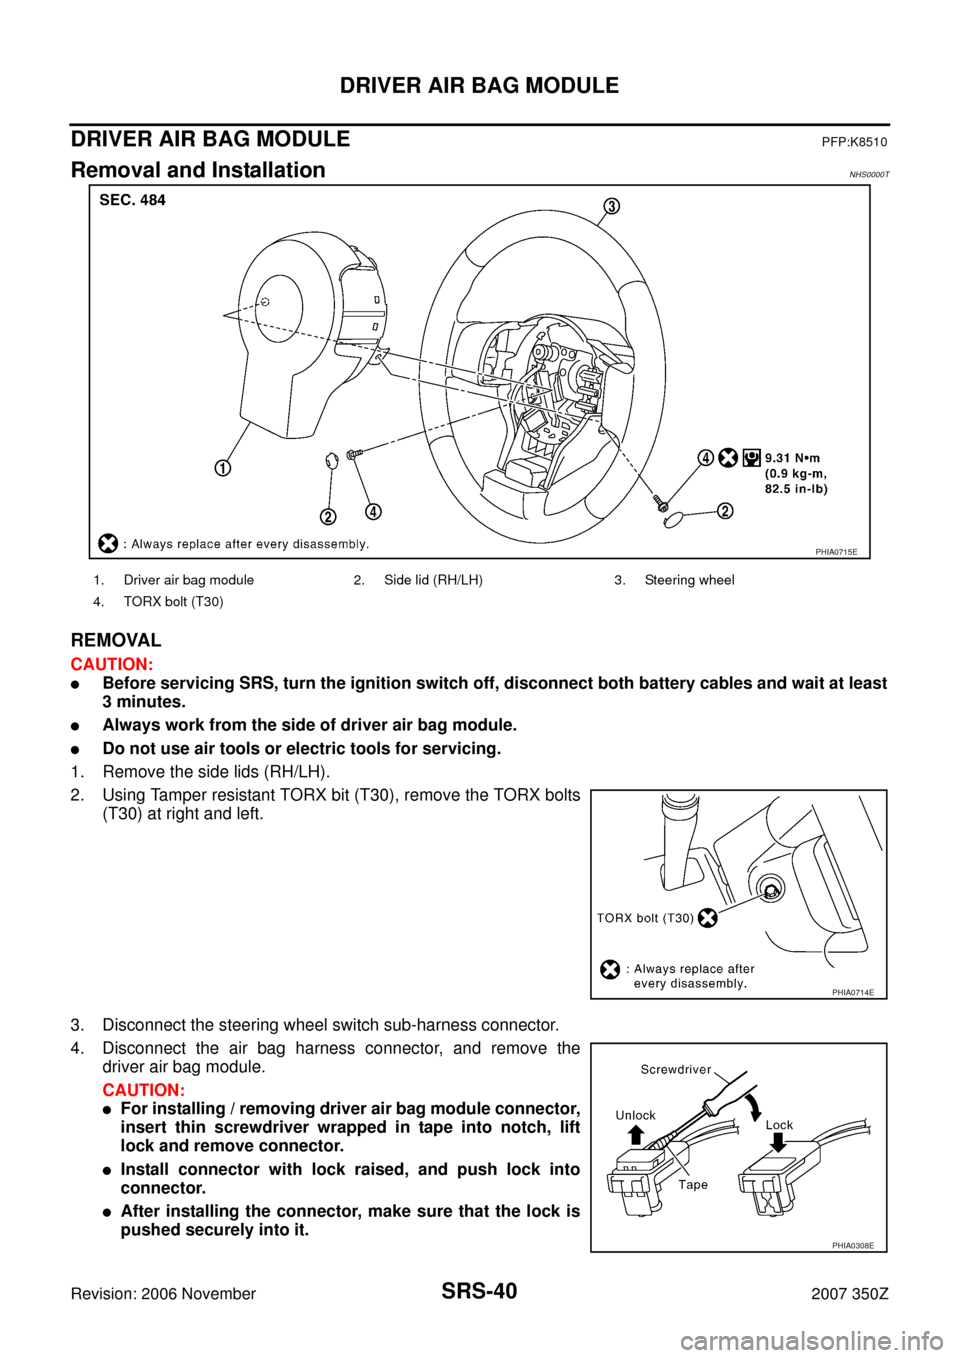 NISSAN 350Z 2007 Z33 Supplemental Restraint System Owners Guide SRS-40
DRIVER AIR BAG MODULE
Revision: 2006 November2007 350Z
DRIVER AIR BAG MODULEPFP:K8510
Removal and InstallationNHS0000T
REMOVAL
CAUTION:
Before servicing SRS, turn the ignition switch off, disc